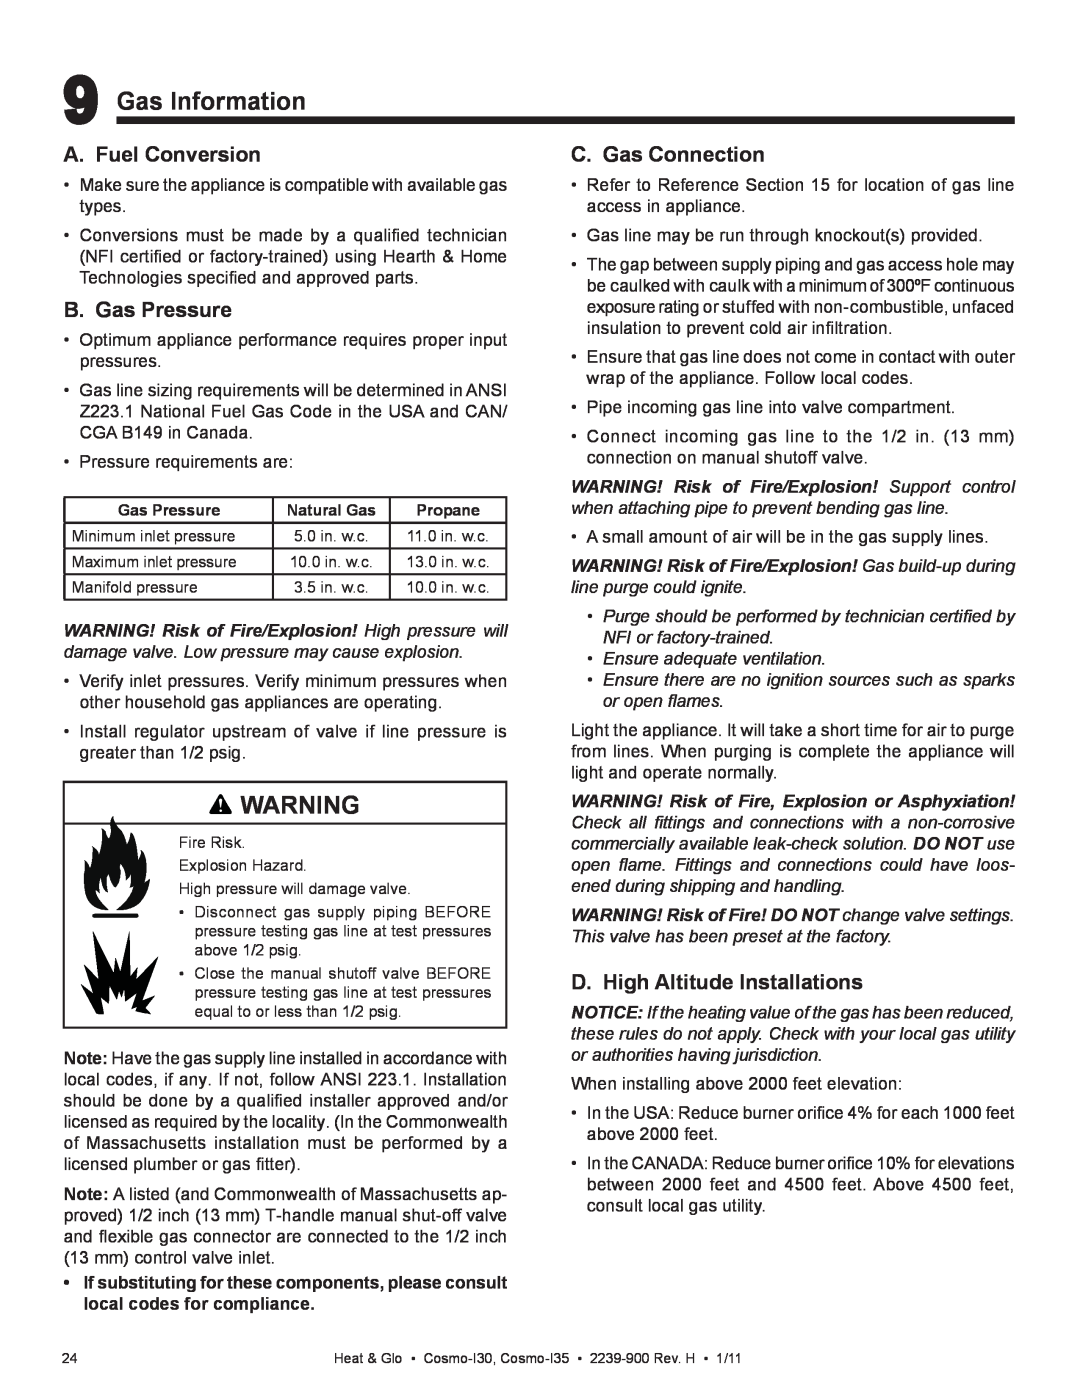 Heat & Glo LifeStyle Cosmo-130 owner manual Gas Information, A. Fuel Conversion, B. Gas Pressure, C. Gas Connection 